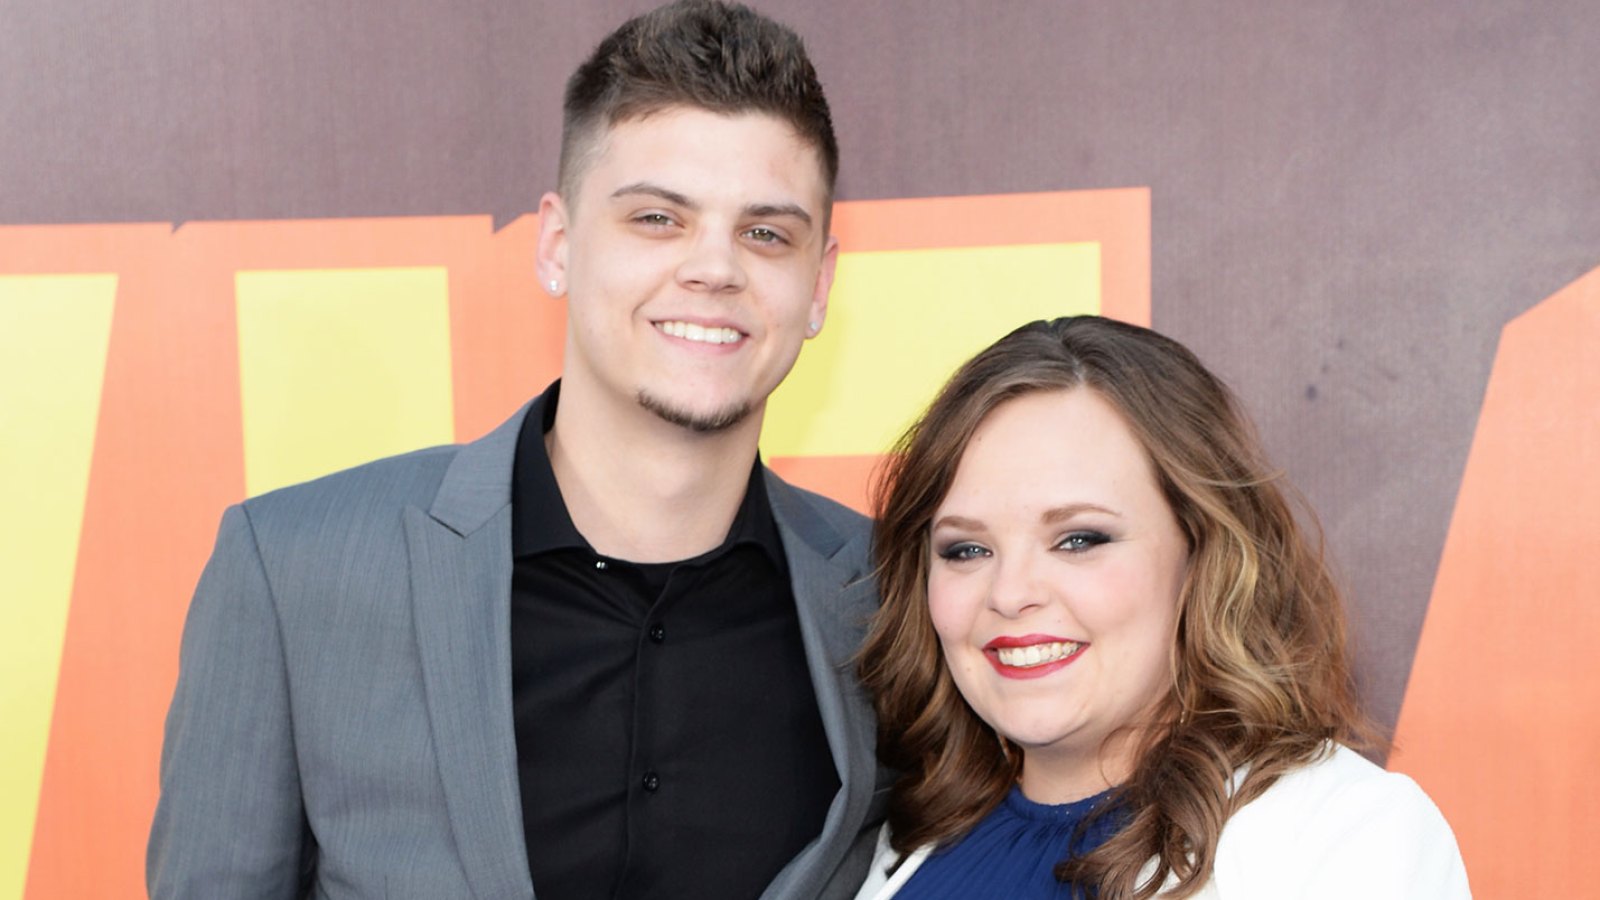 Teen Mom OG’s Catelynn Lowell and Tyler Baltierra Celebrate Christmas Together Amid Separation: ’Truly Blessed’